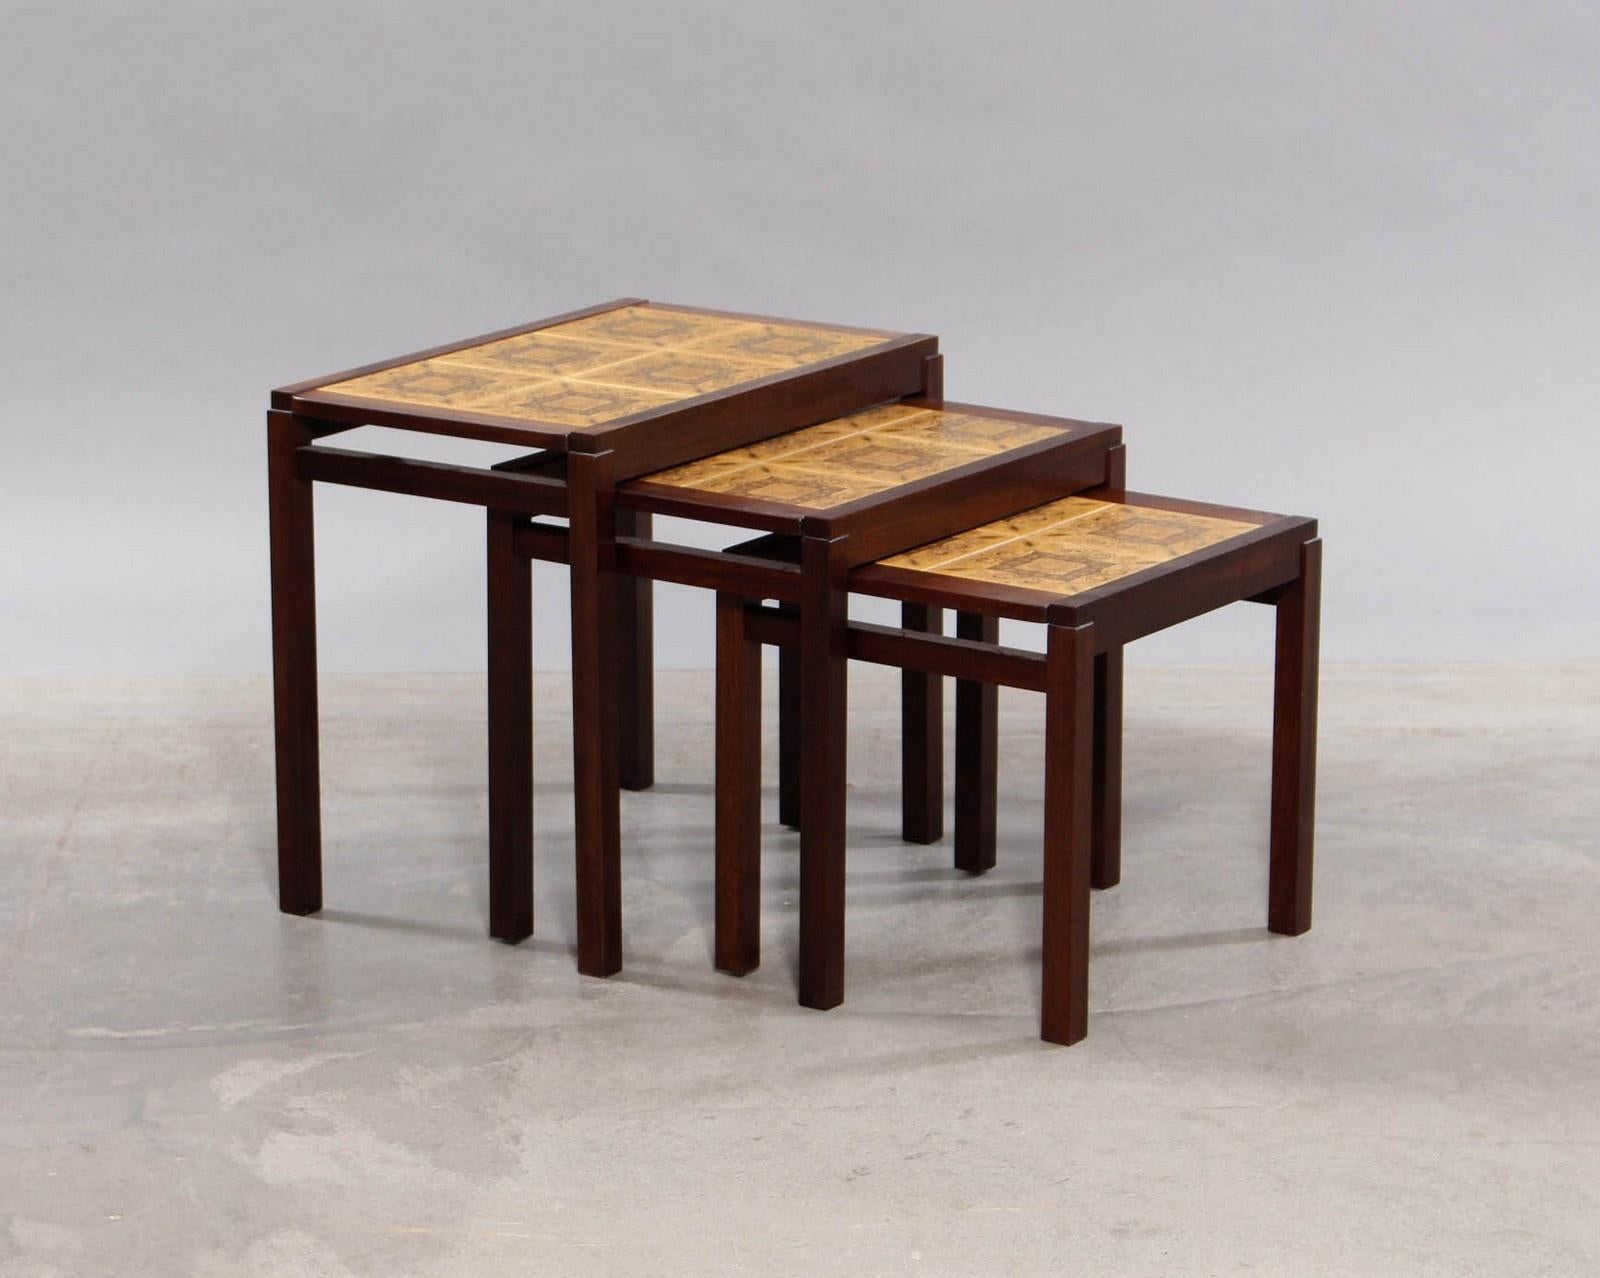 Set of Three Rosewood and Ceramic Tile Danish Modern Nesting Tables